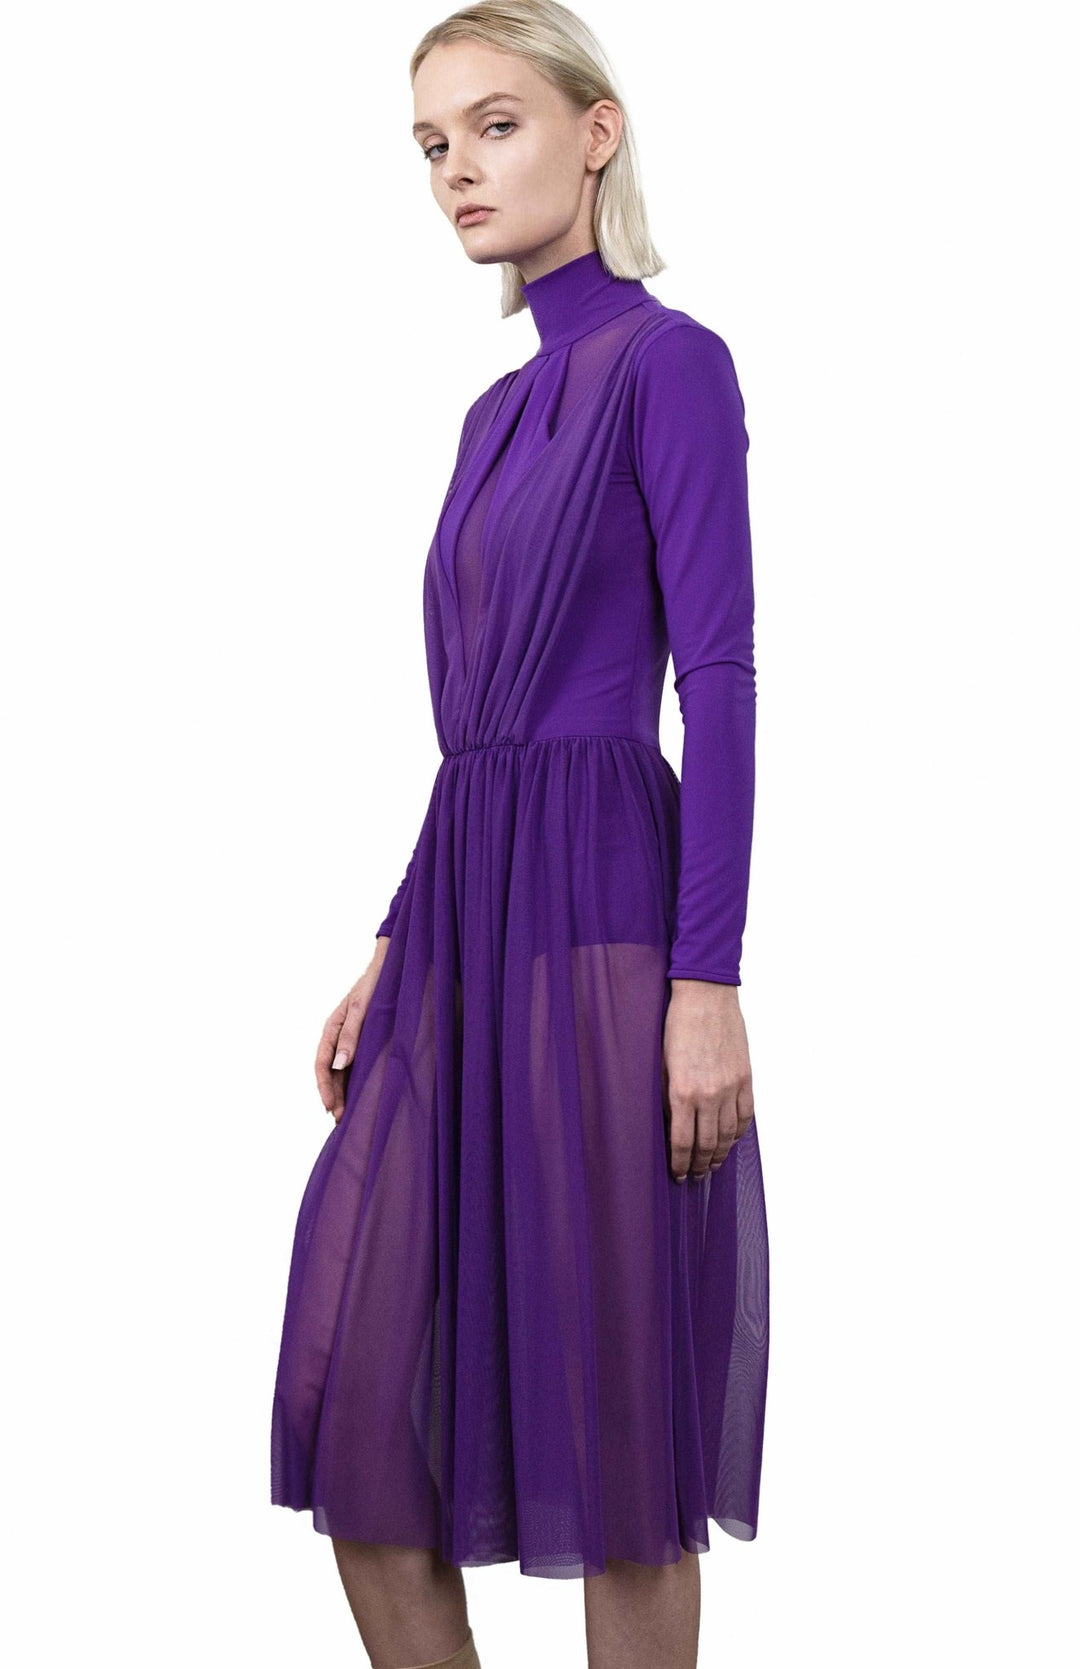 Purple, ballerina style, bodysuit dress, with long sleeves, turtleneck and gathered sheer skirt below the knee.